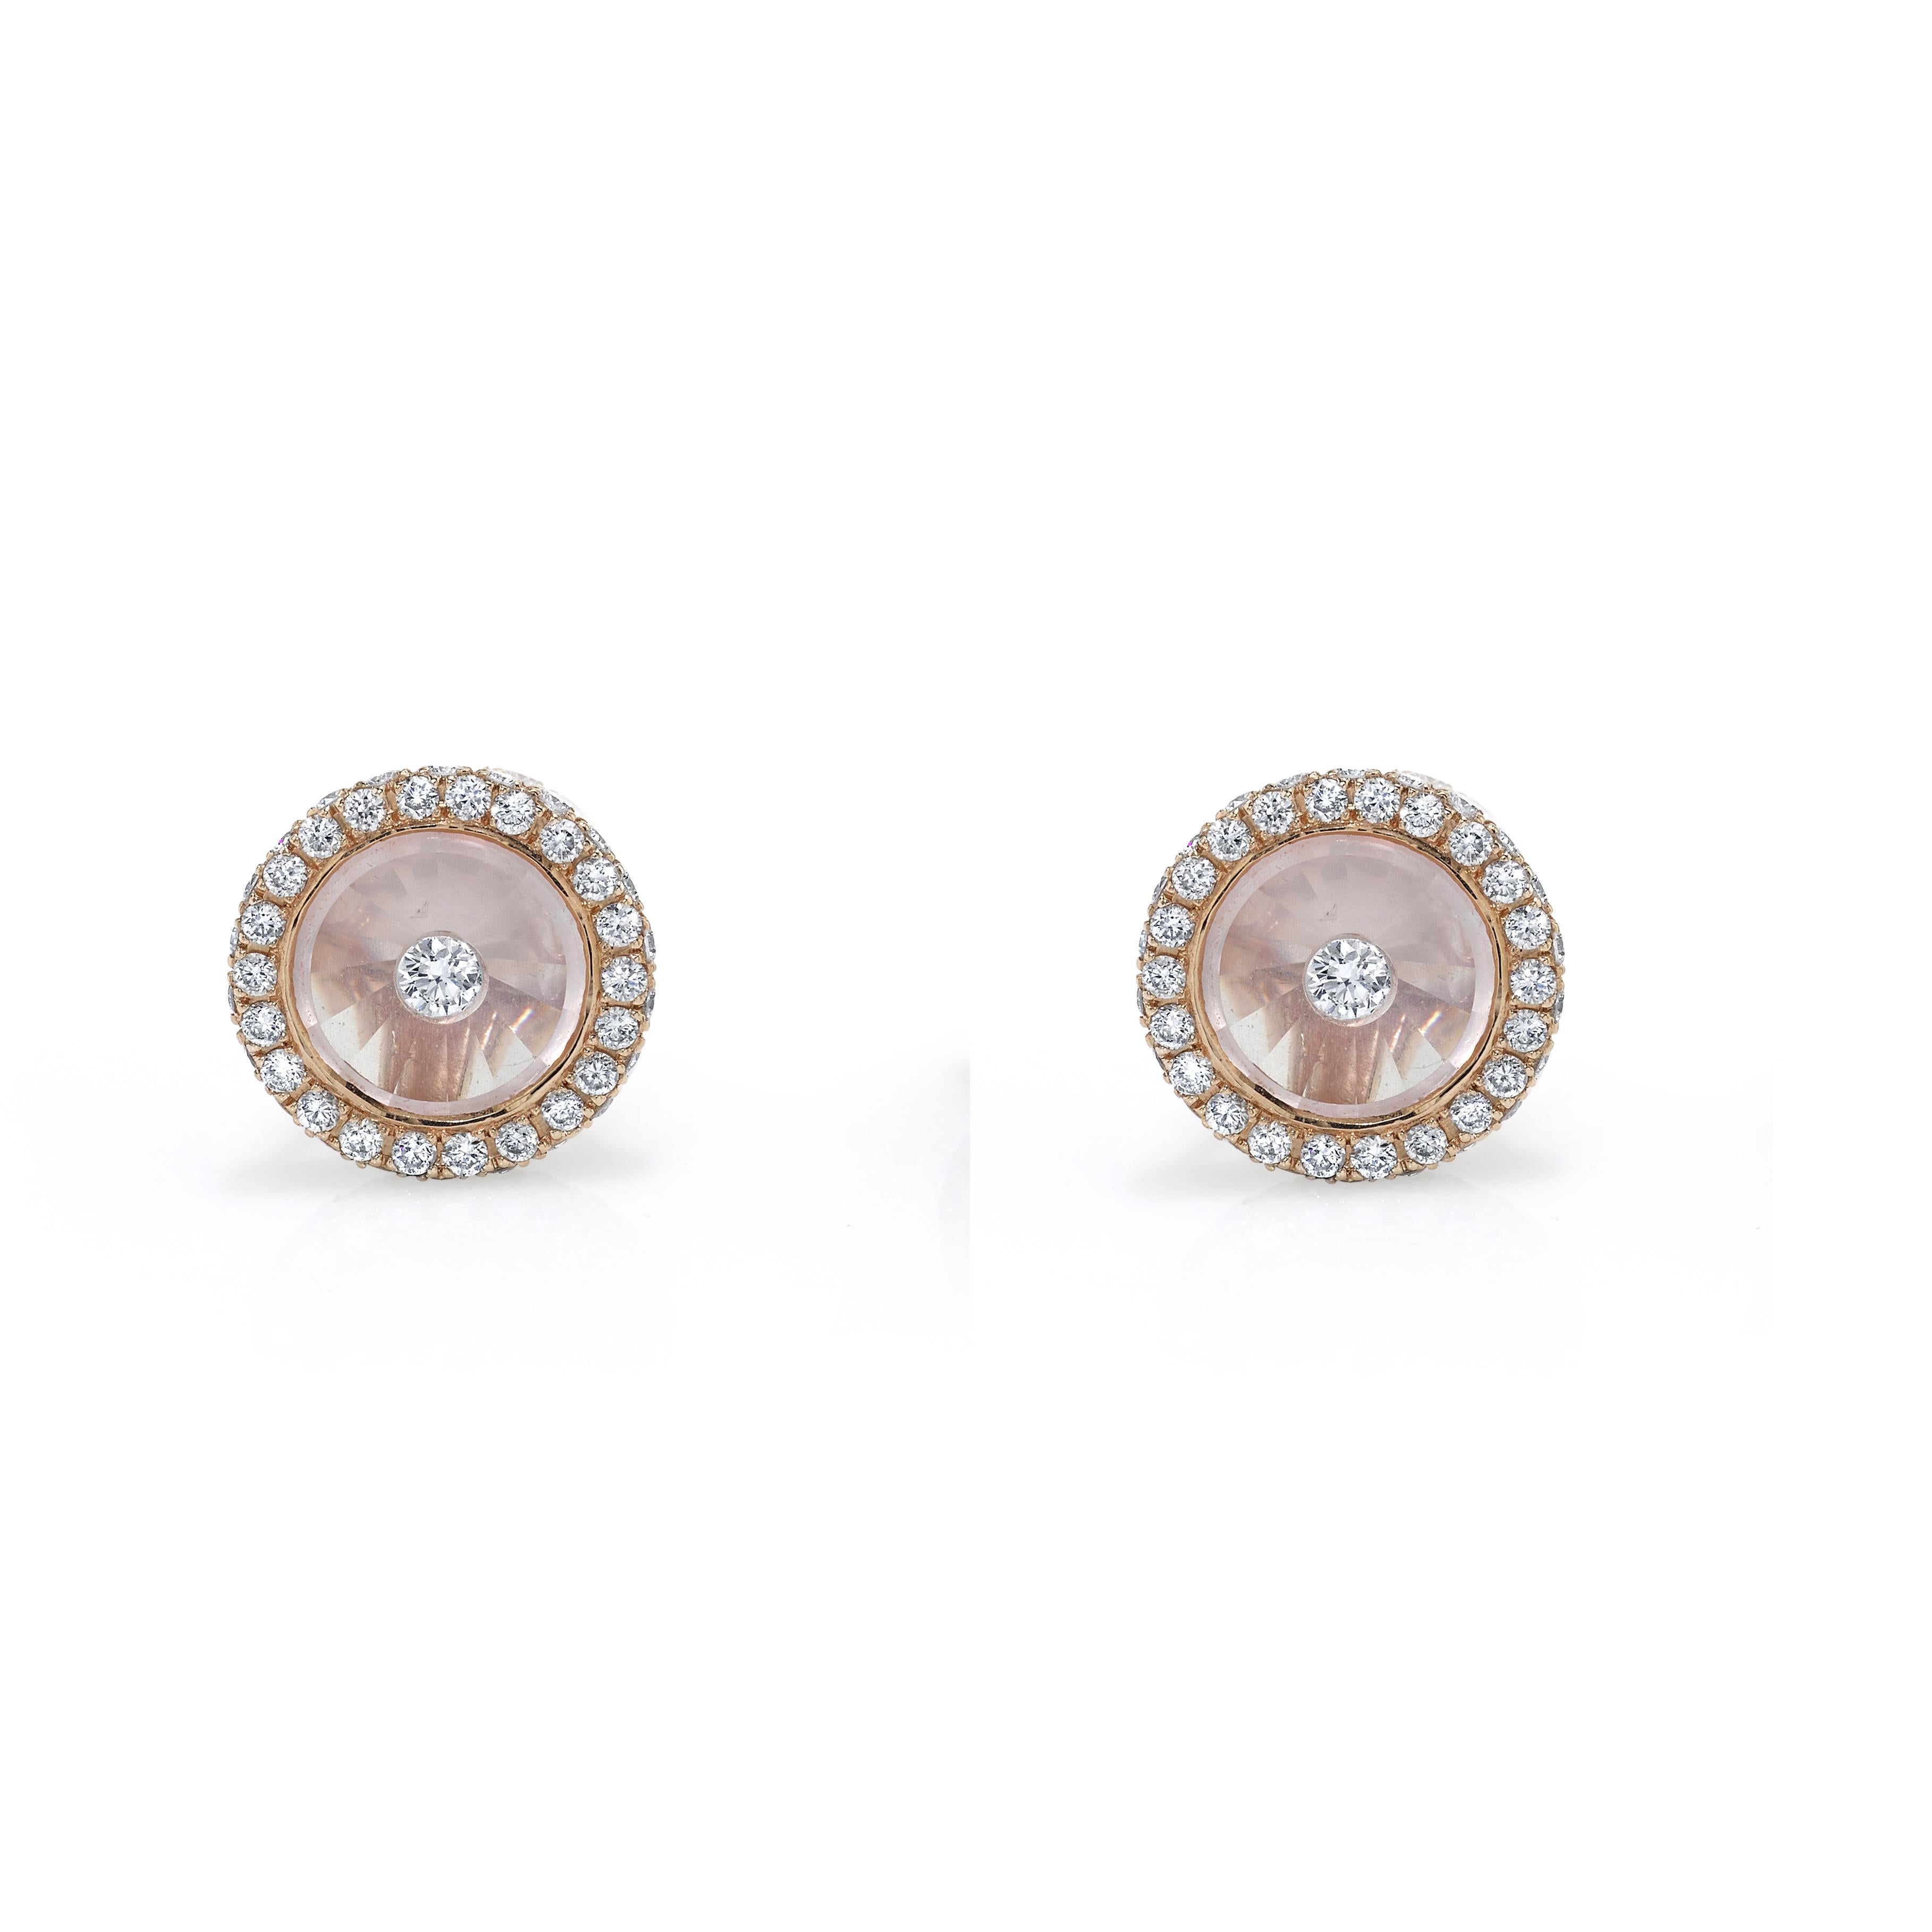 This earring is from our Bhansali Spirit collection, a collection inspired by cocktails. Faceted from the back by hand, the rose quartz ( 4.79cts) creates a pastel pinwheel shimmer that is sassy, flirty, and fun! Add a diamond center and a sparkling